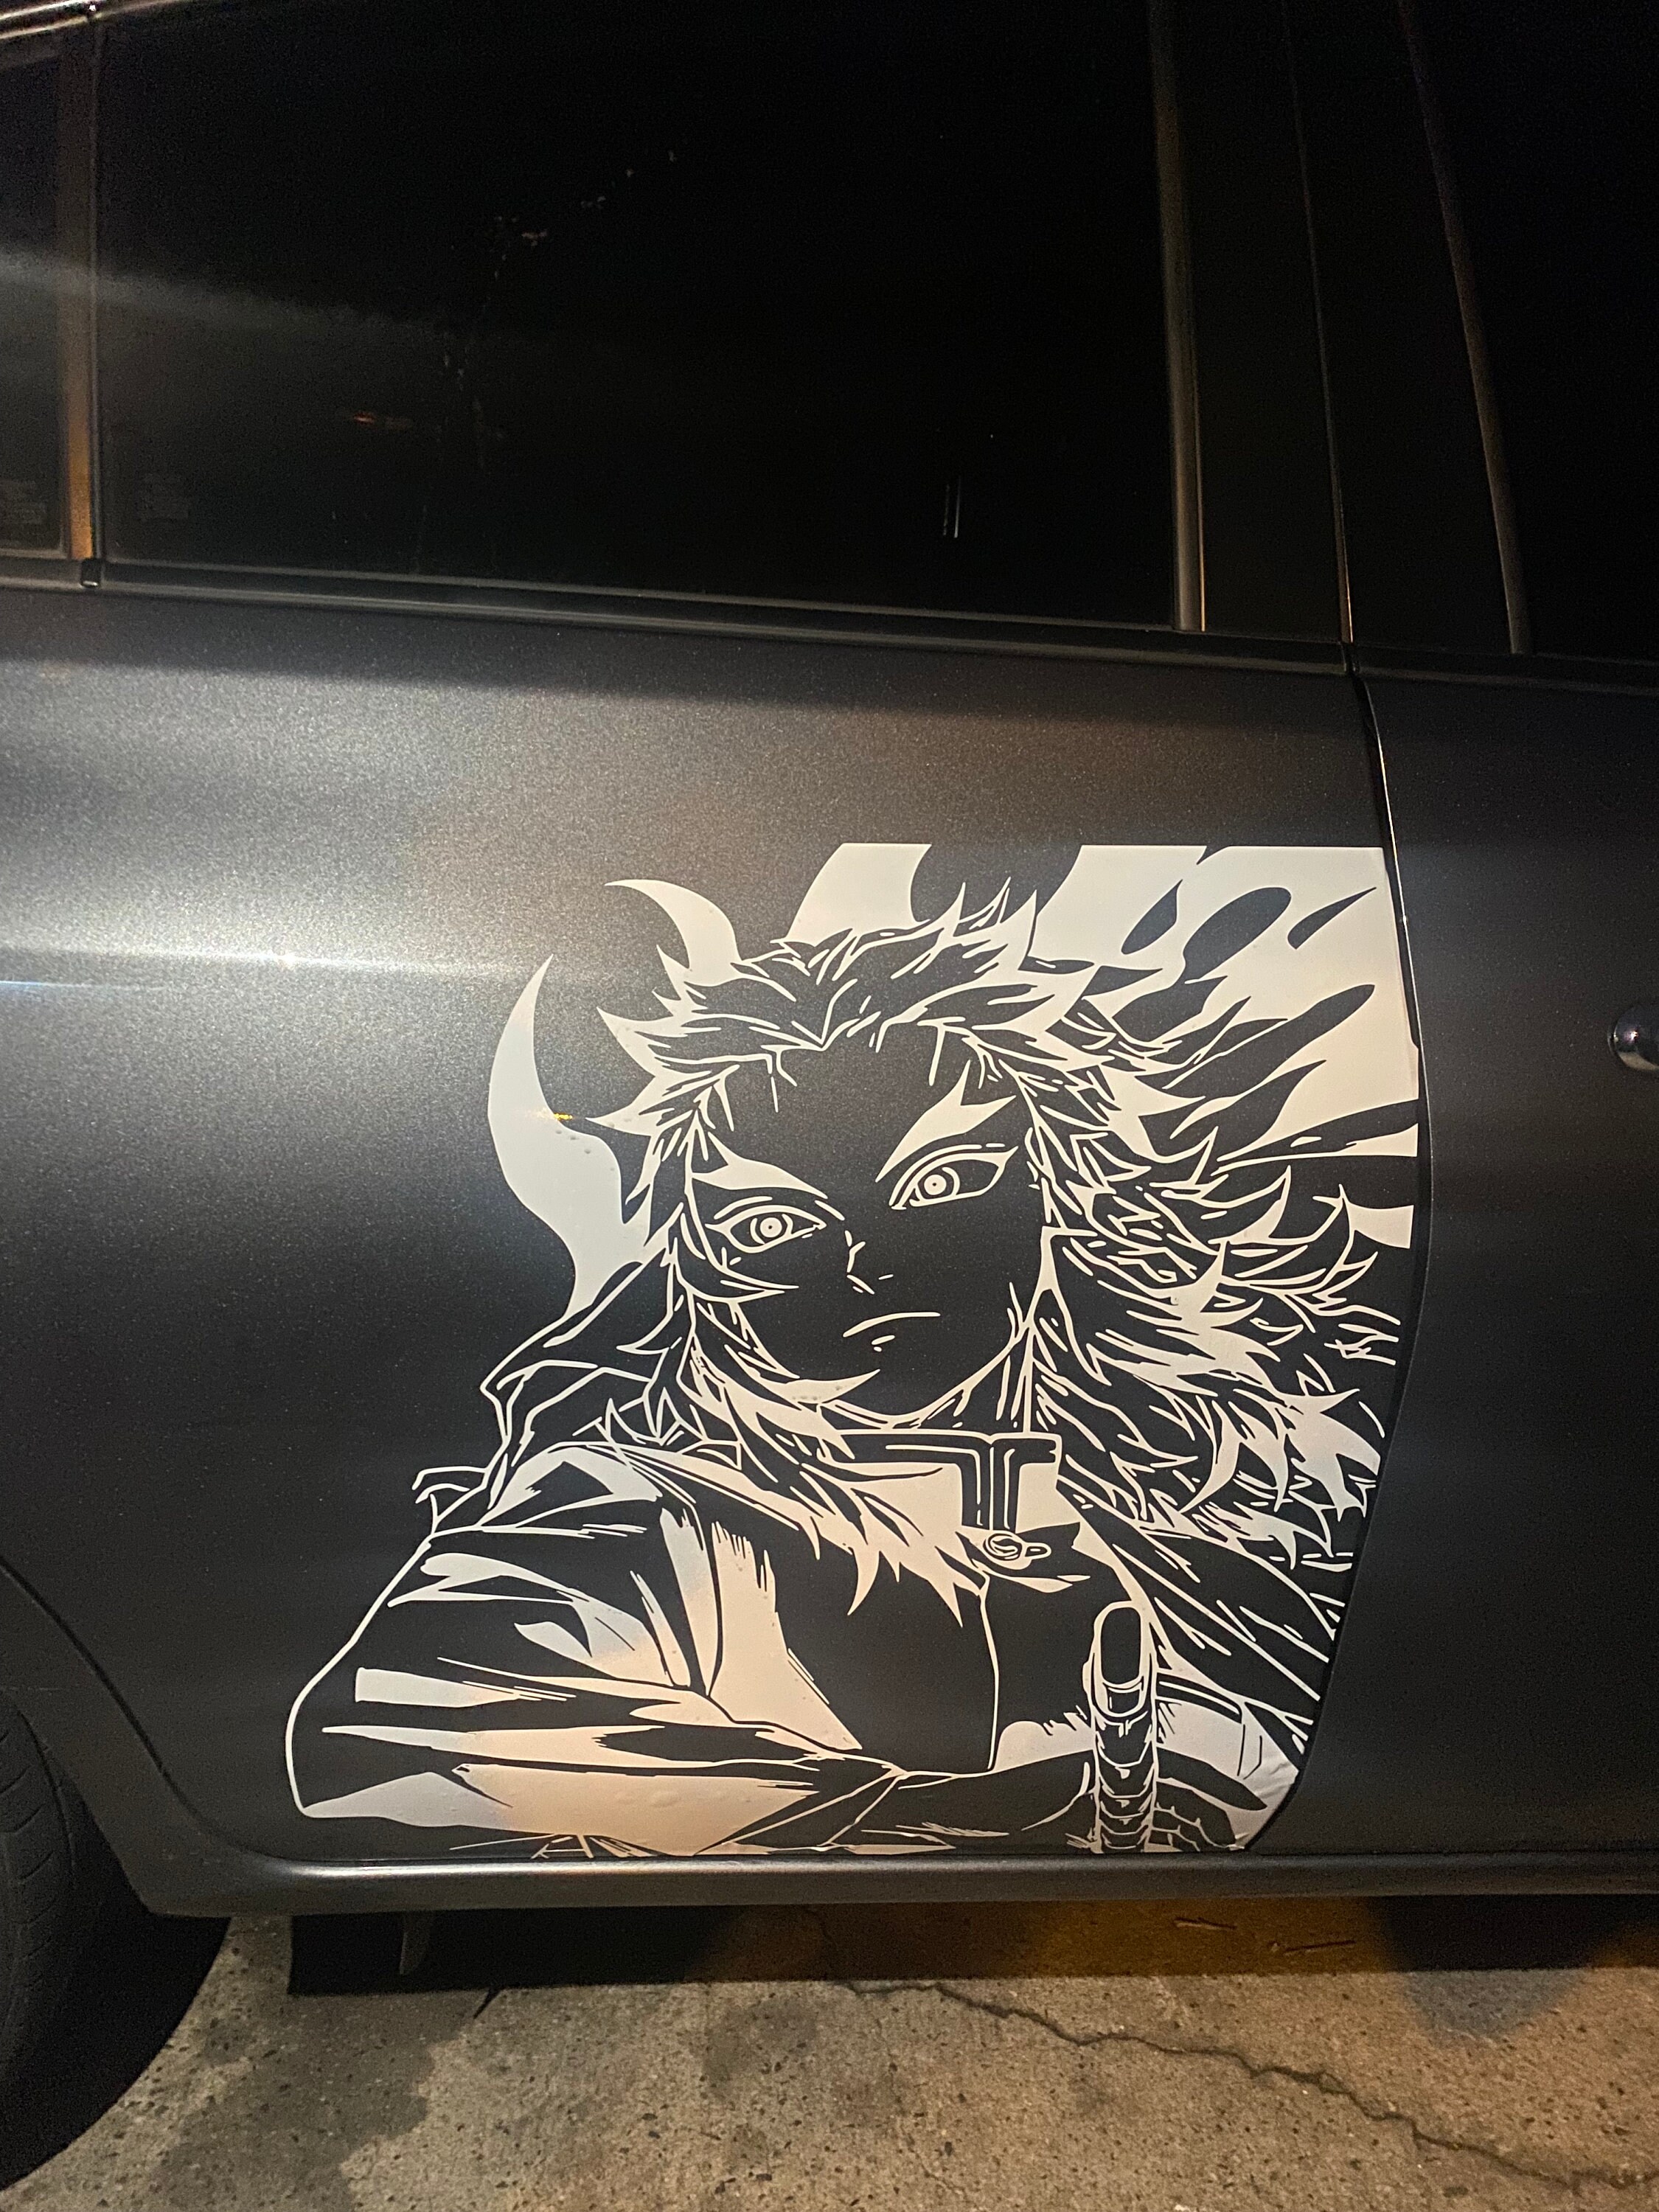 Buy Large Clown Graphic Anime Vinyl Car Truck Wall Decals Online in India   Etsy